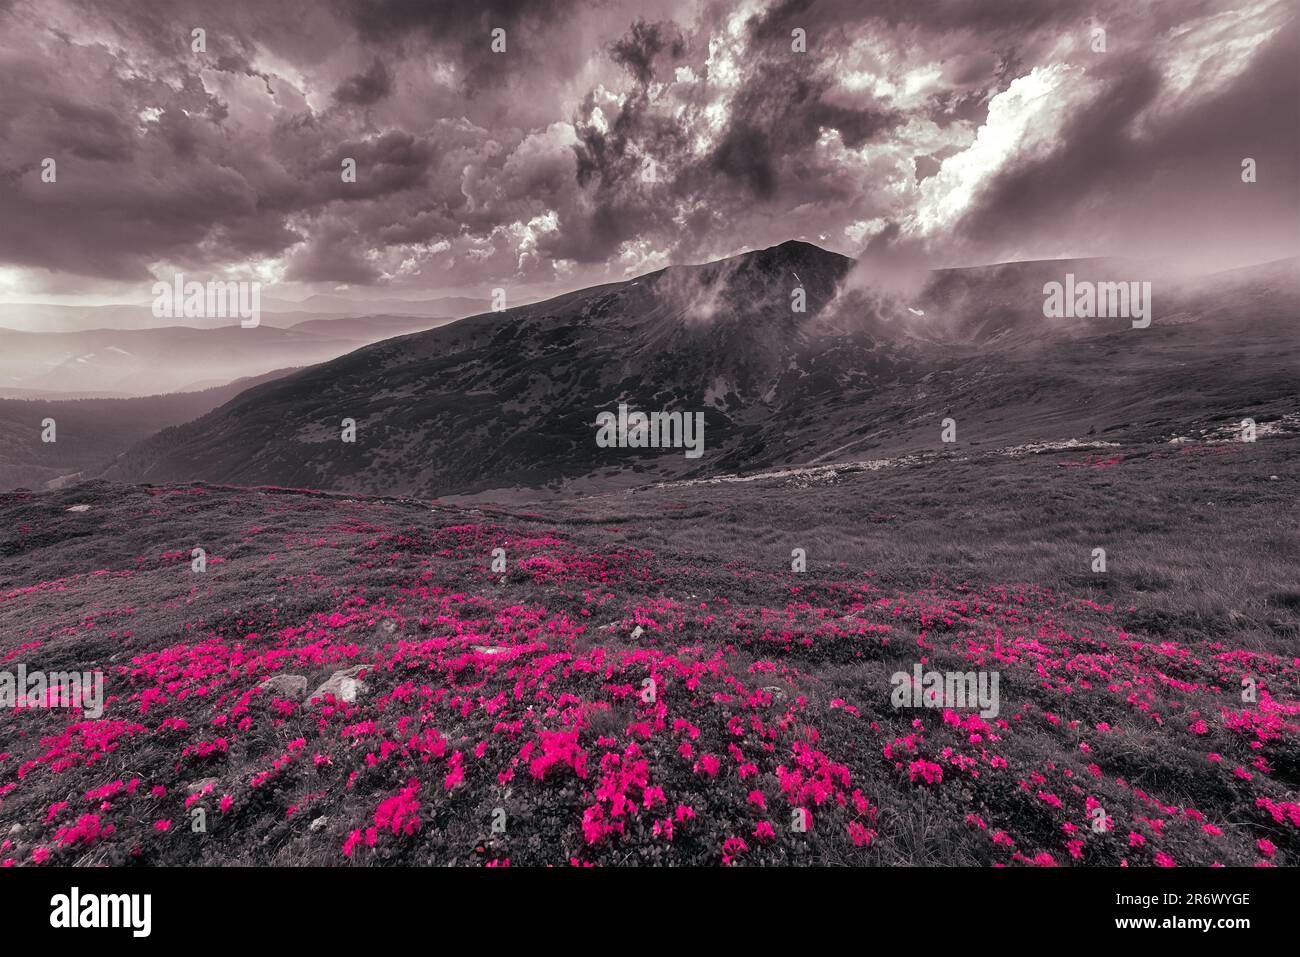 Mountain meadow with pink flowersagainst the mount Brebeneskul, 2,035 m. Blooming Rhododendron in cloudy weather. Carpathian Mountains, Ukraine. Stock Photo